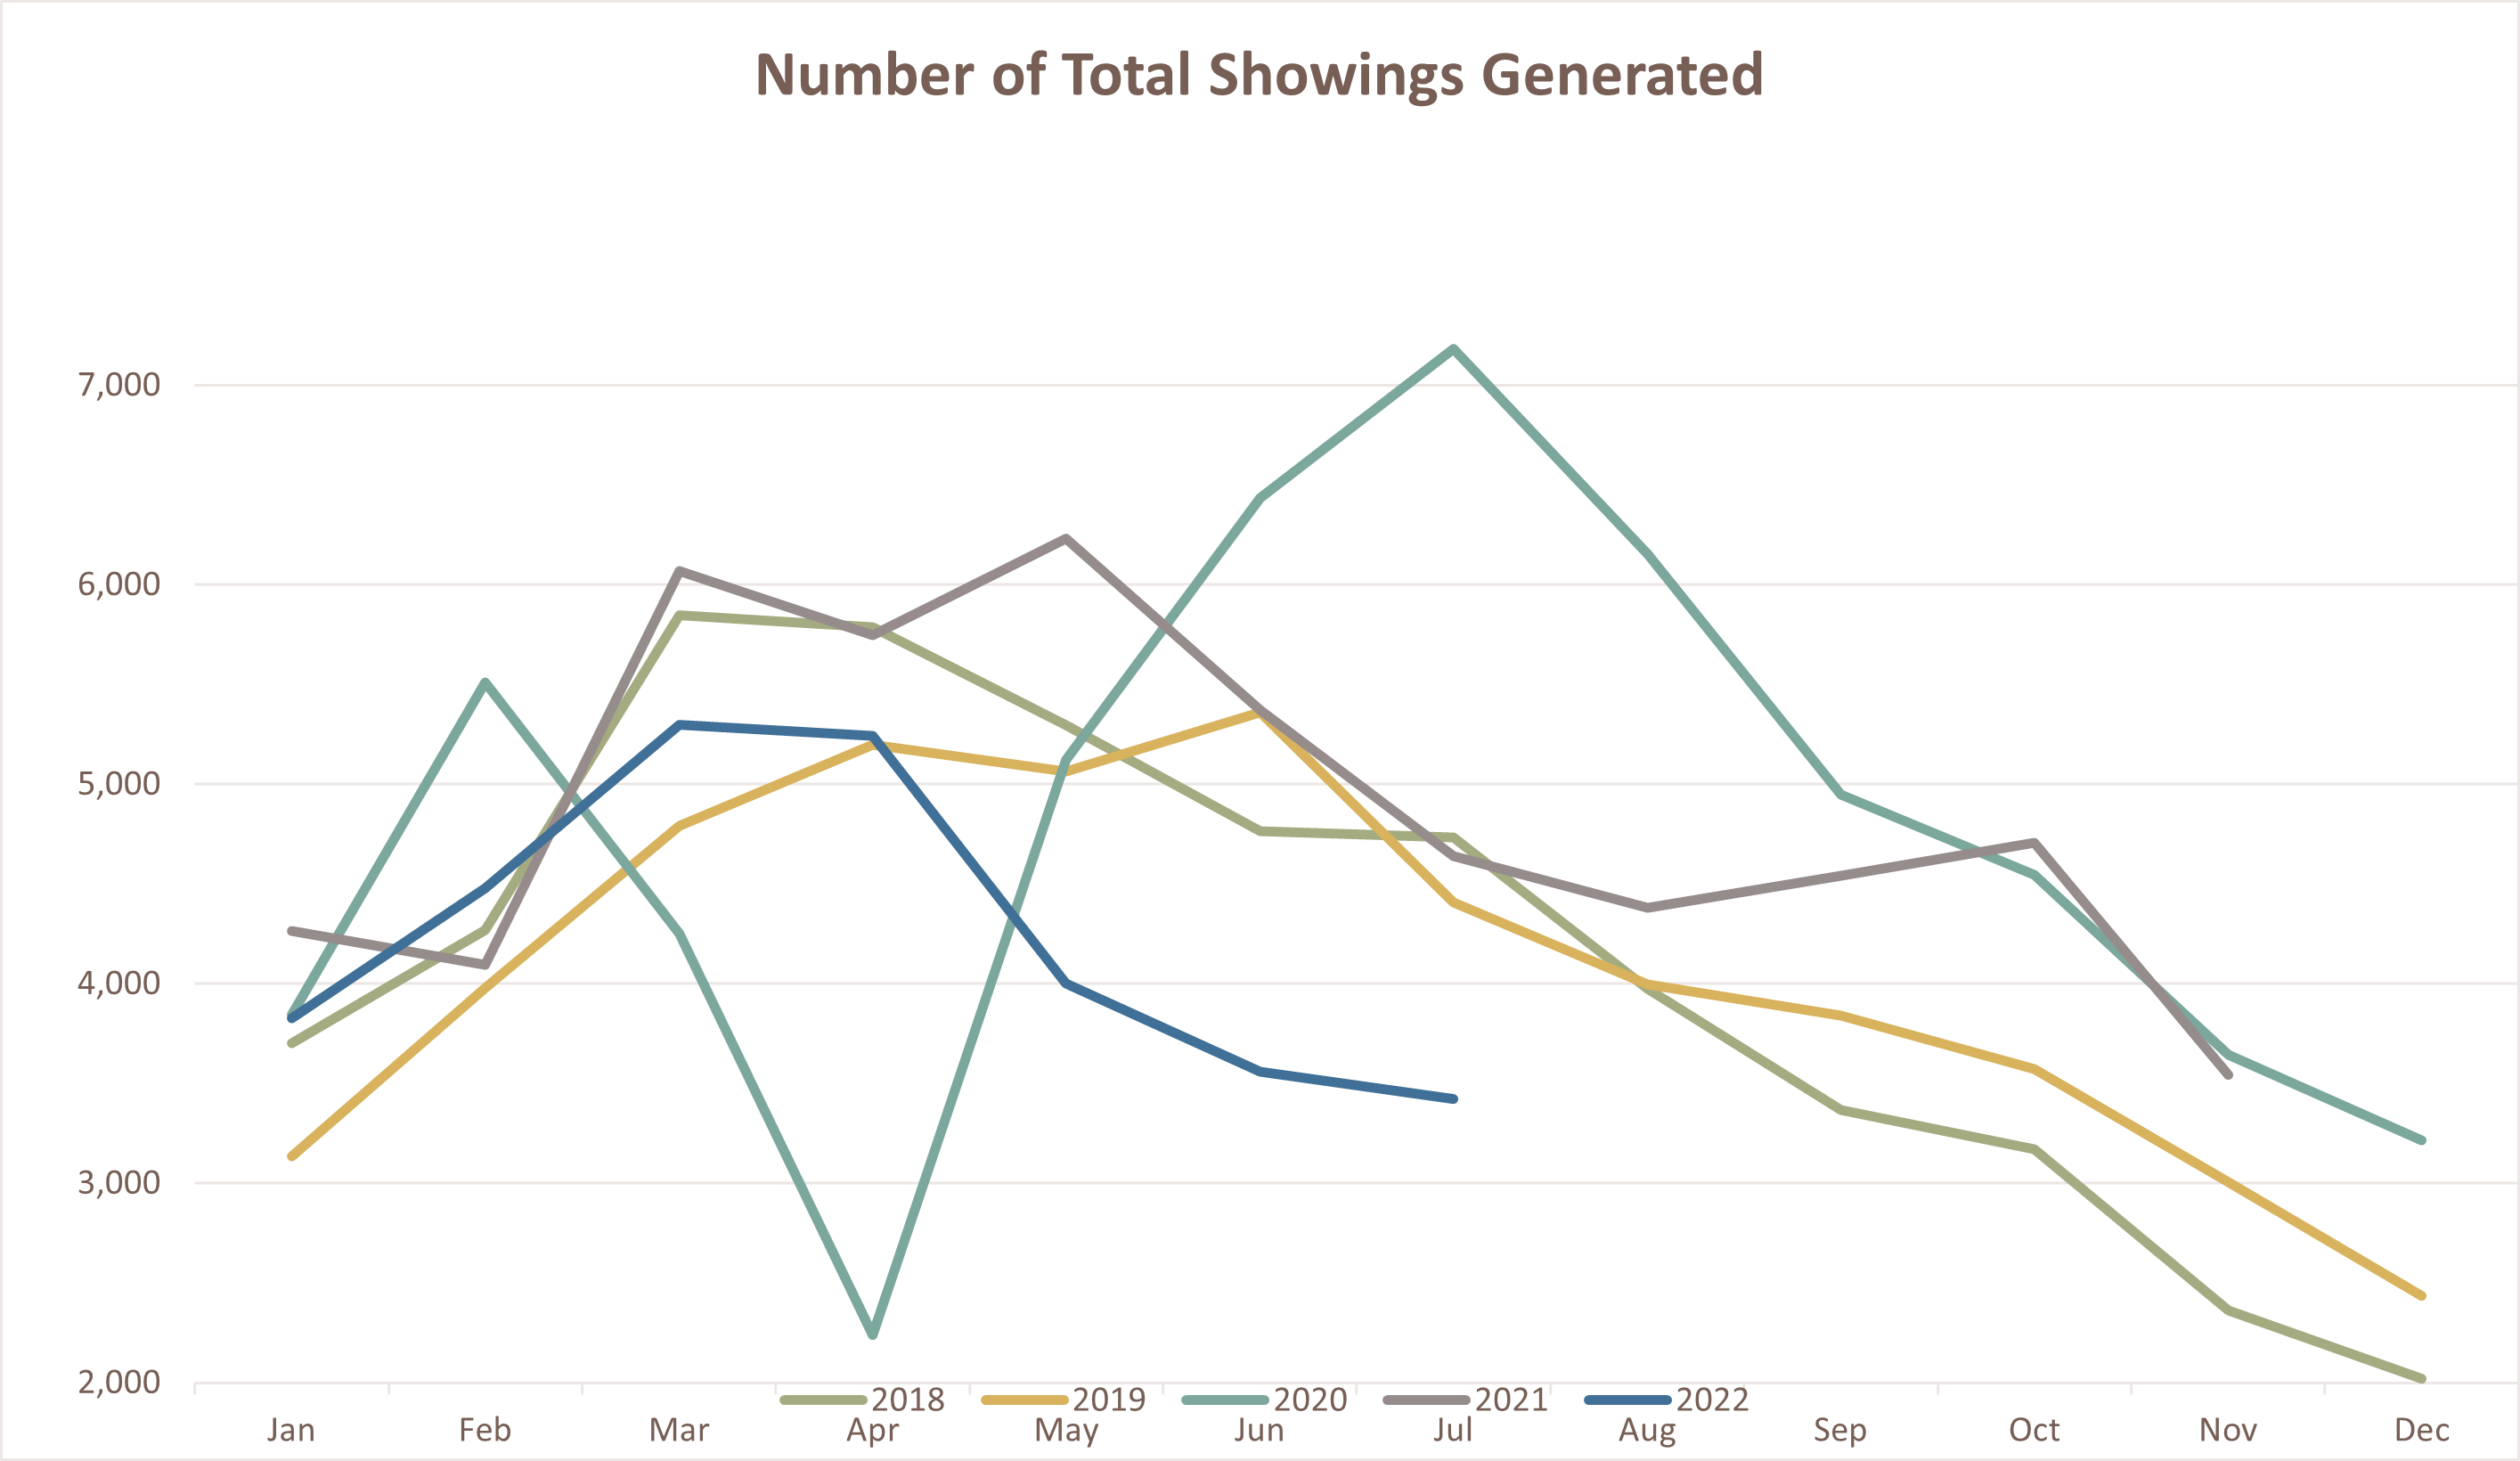 Number of showings generated